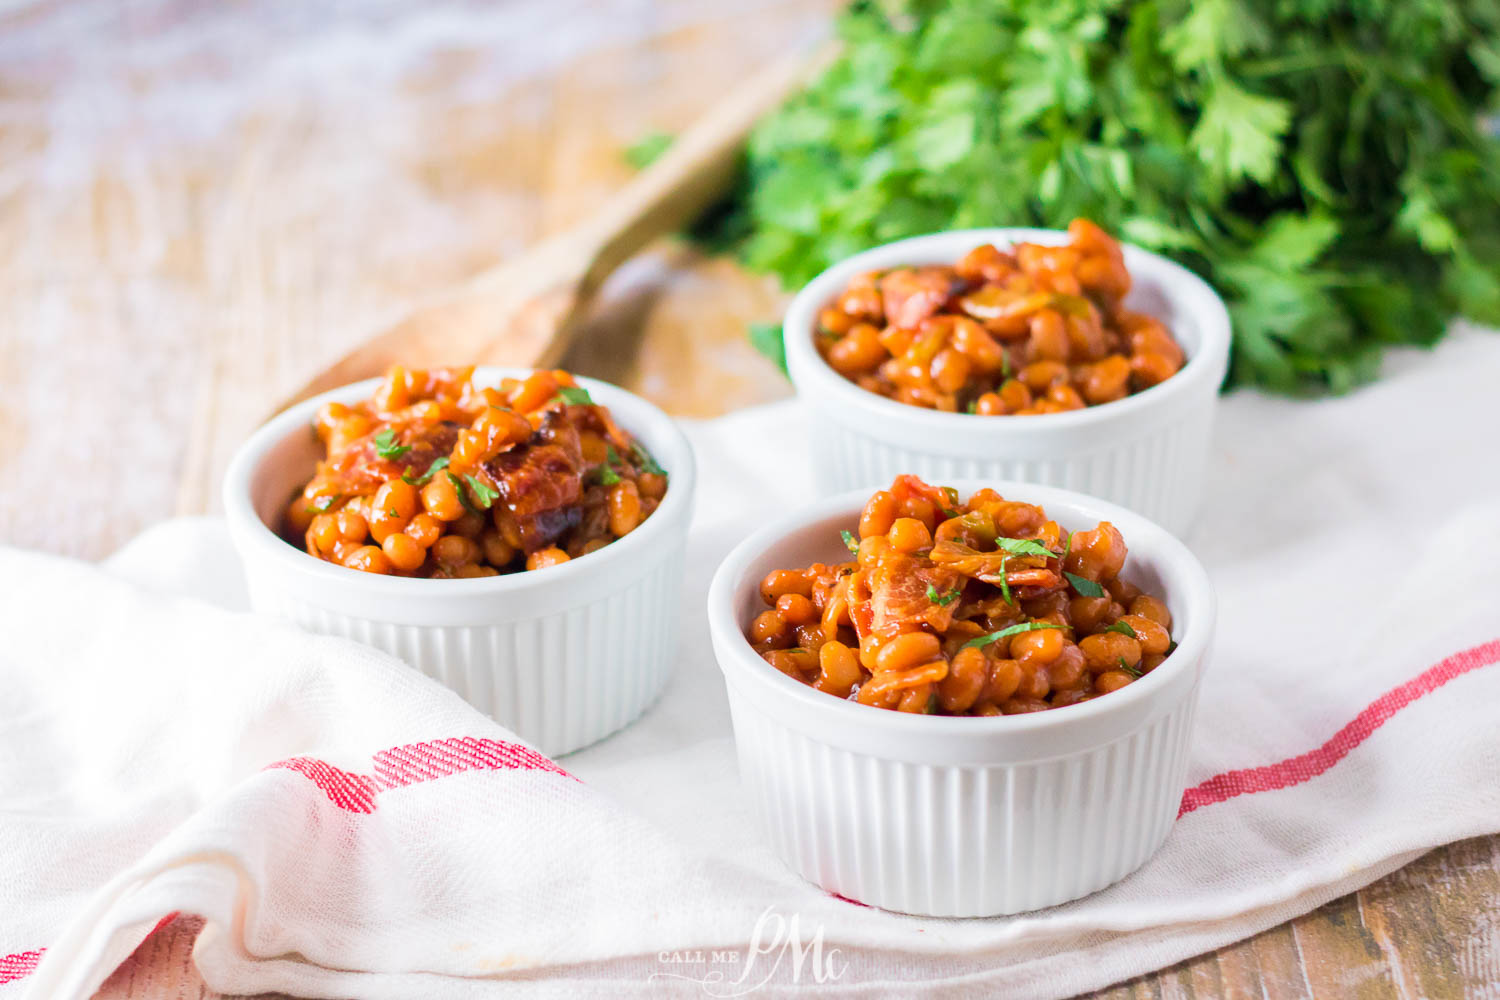 Slow Cooker BBQ Beans are cooked low and slow to bring out the best flavors! They're sweet, tangy, smokey, and hearty.